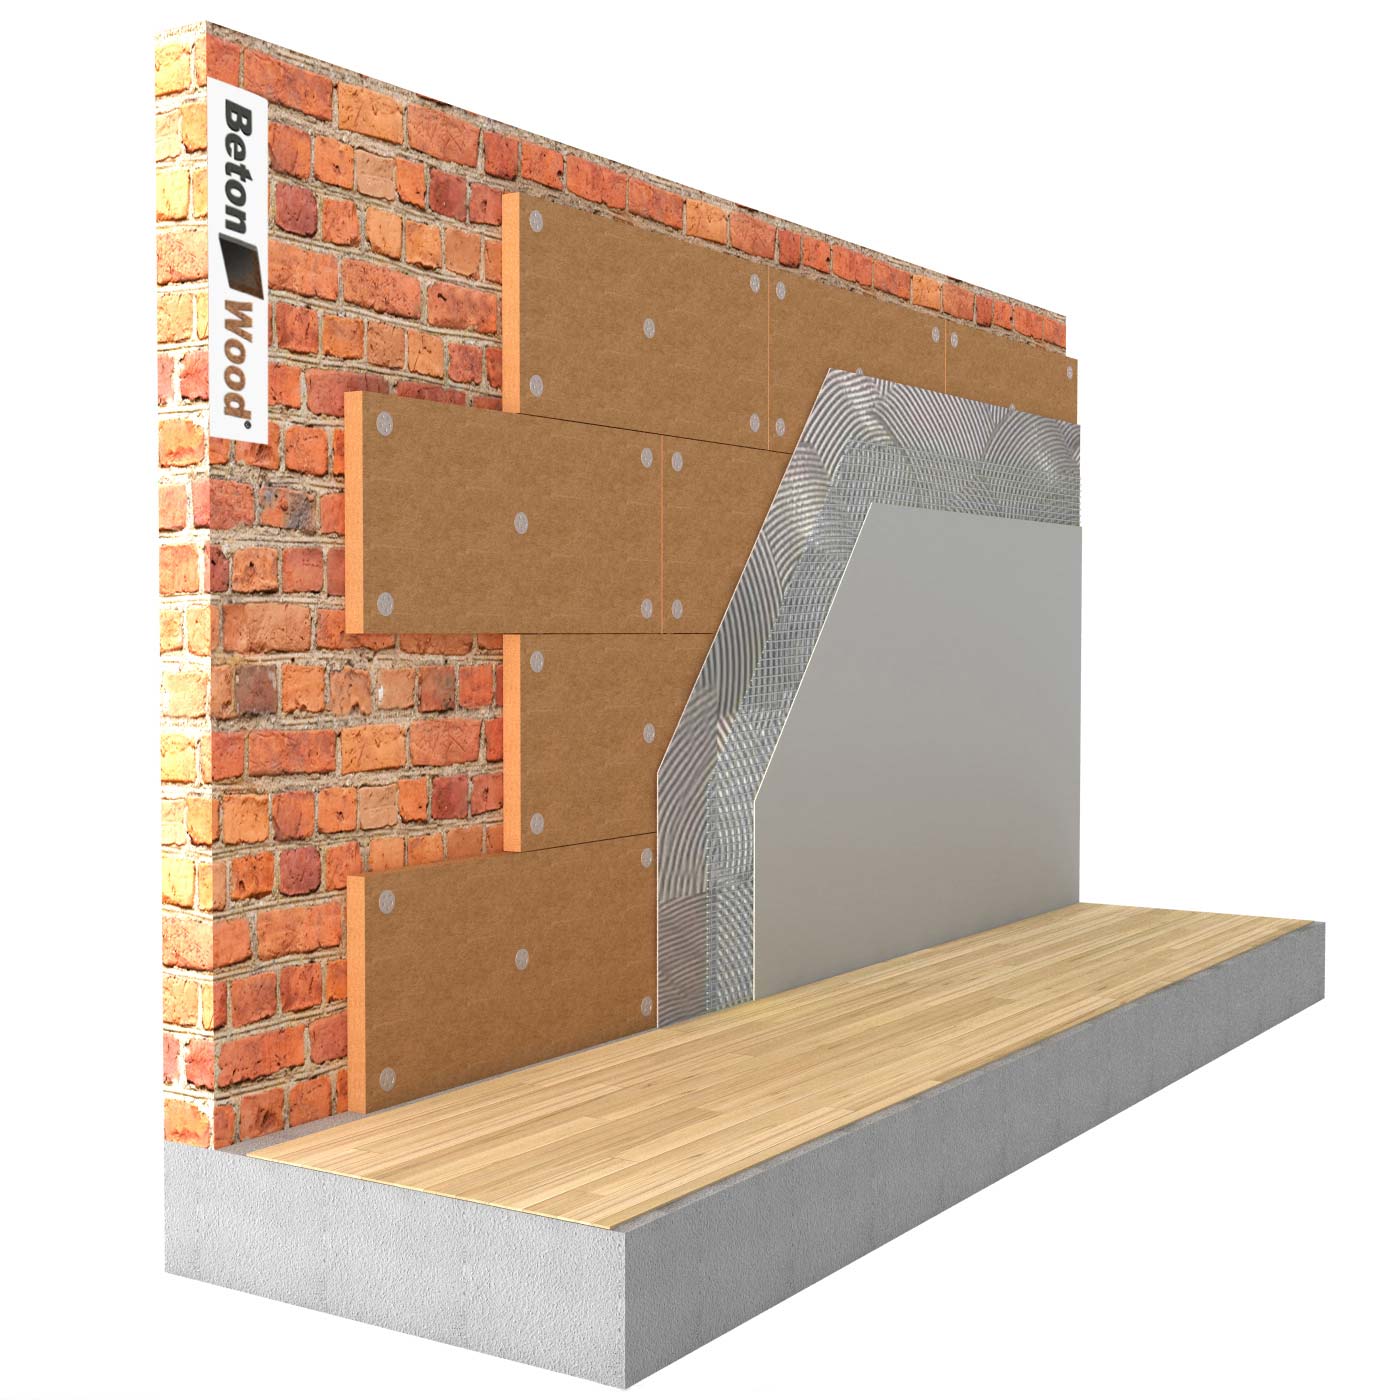 Internal thermal insulation system in Protect Wood fiber